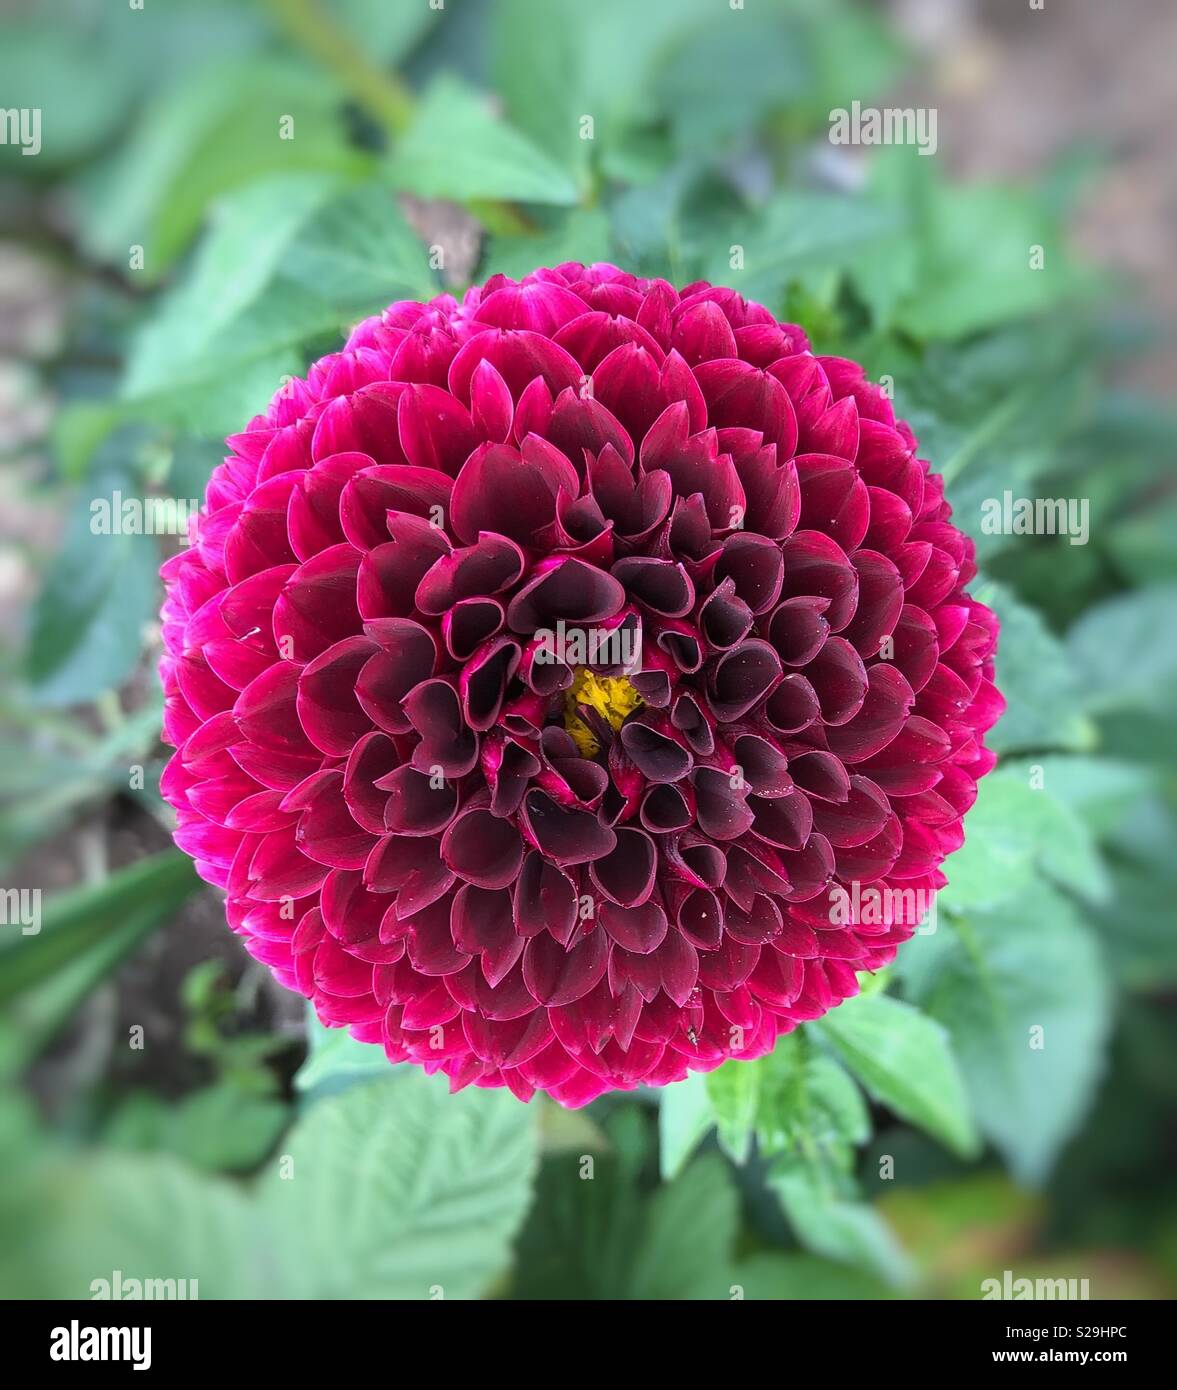 Red/pinky dahlia flower in full bloom Stock Photo